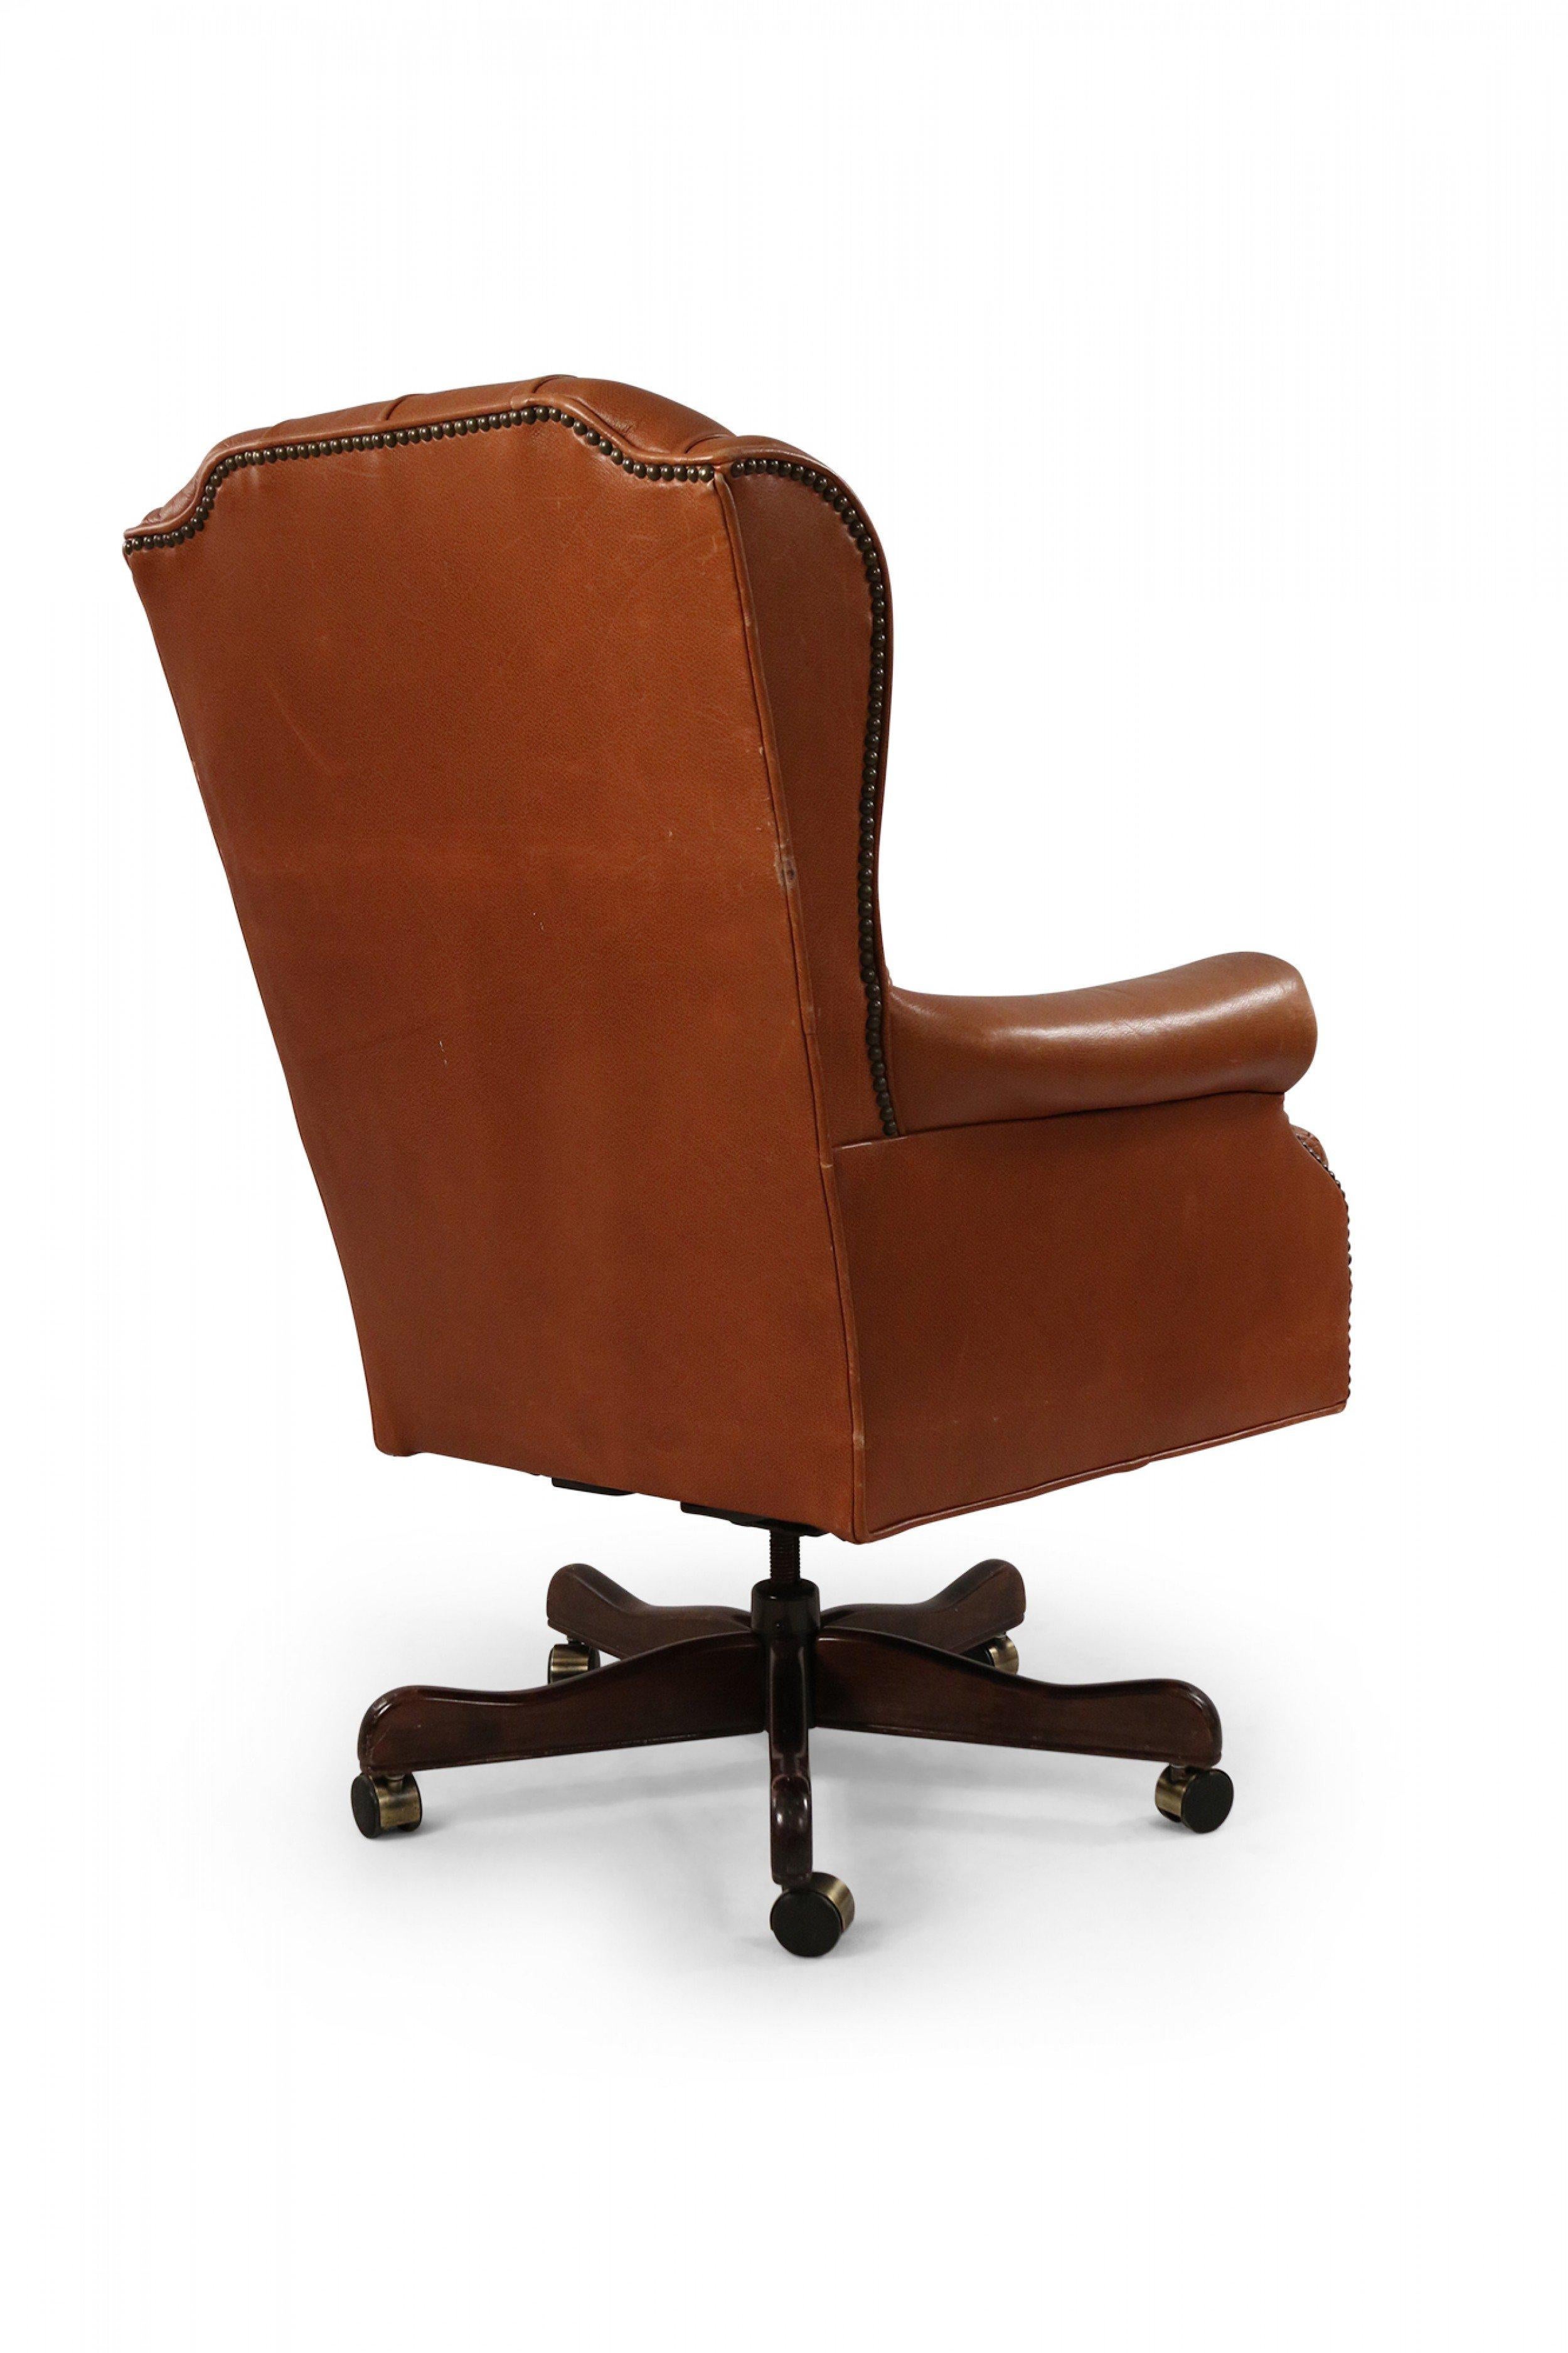 20th Century Mid-Century American Brown Tufted Leather Swivel Office / Armchair For Sale